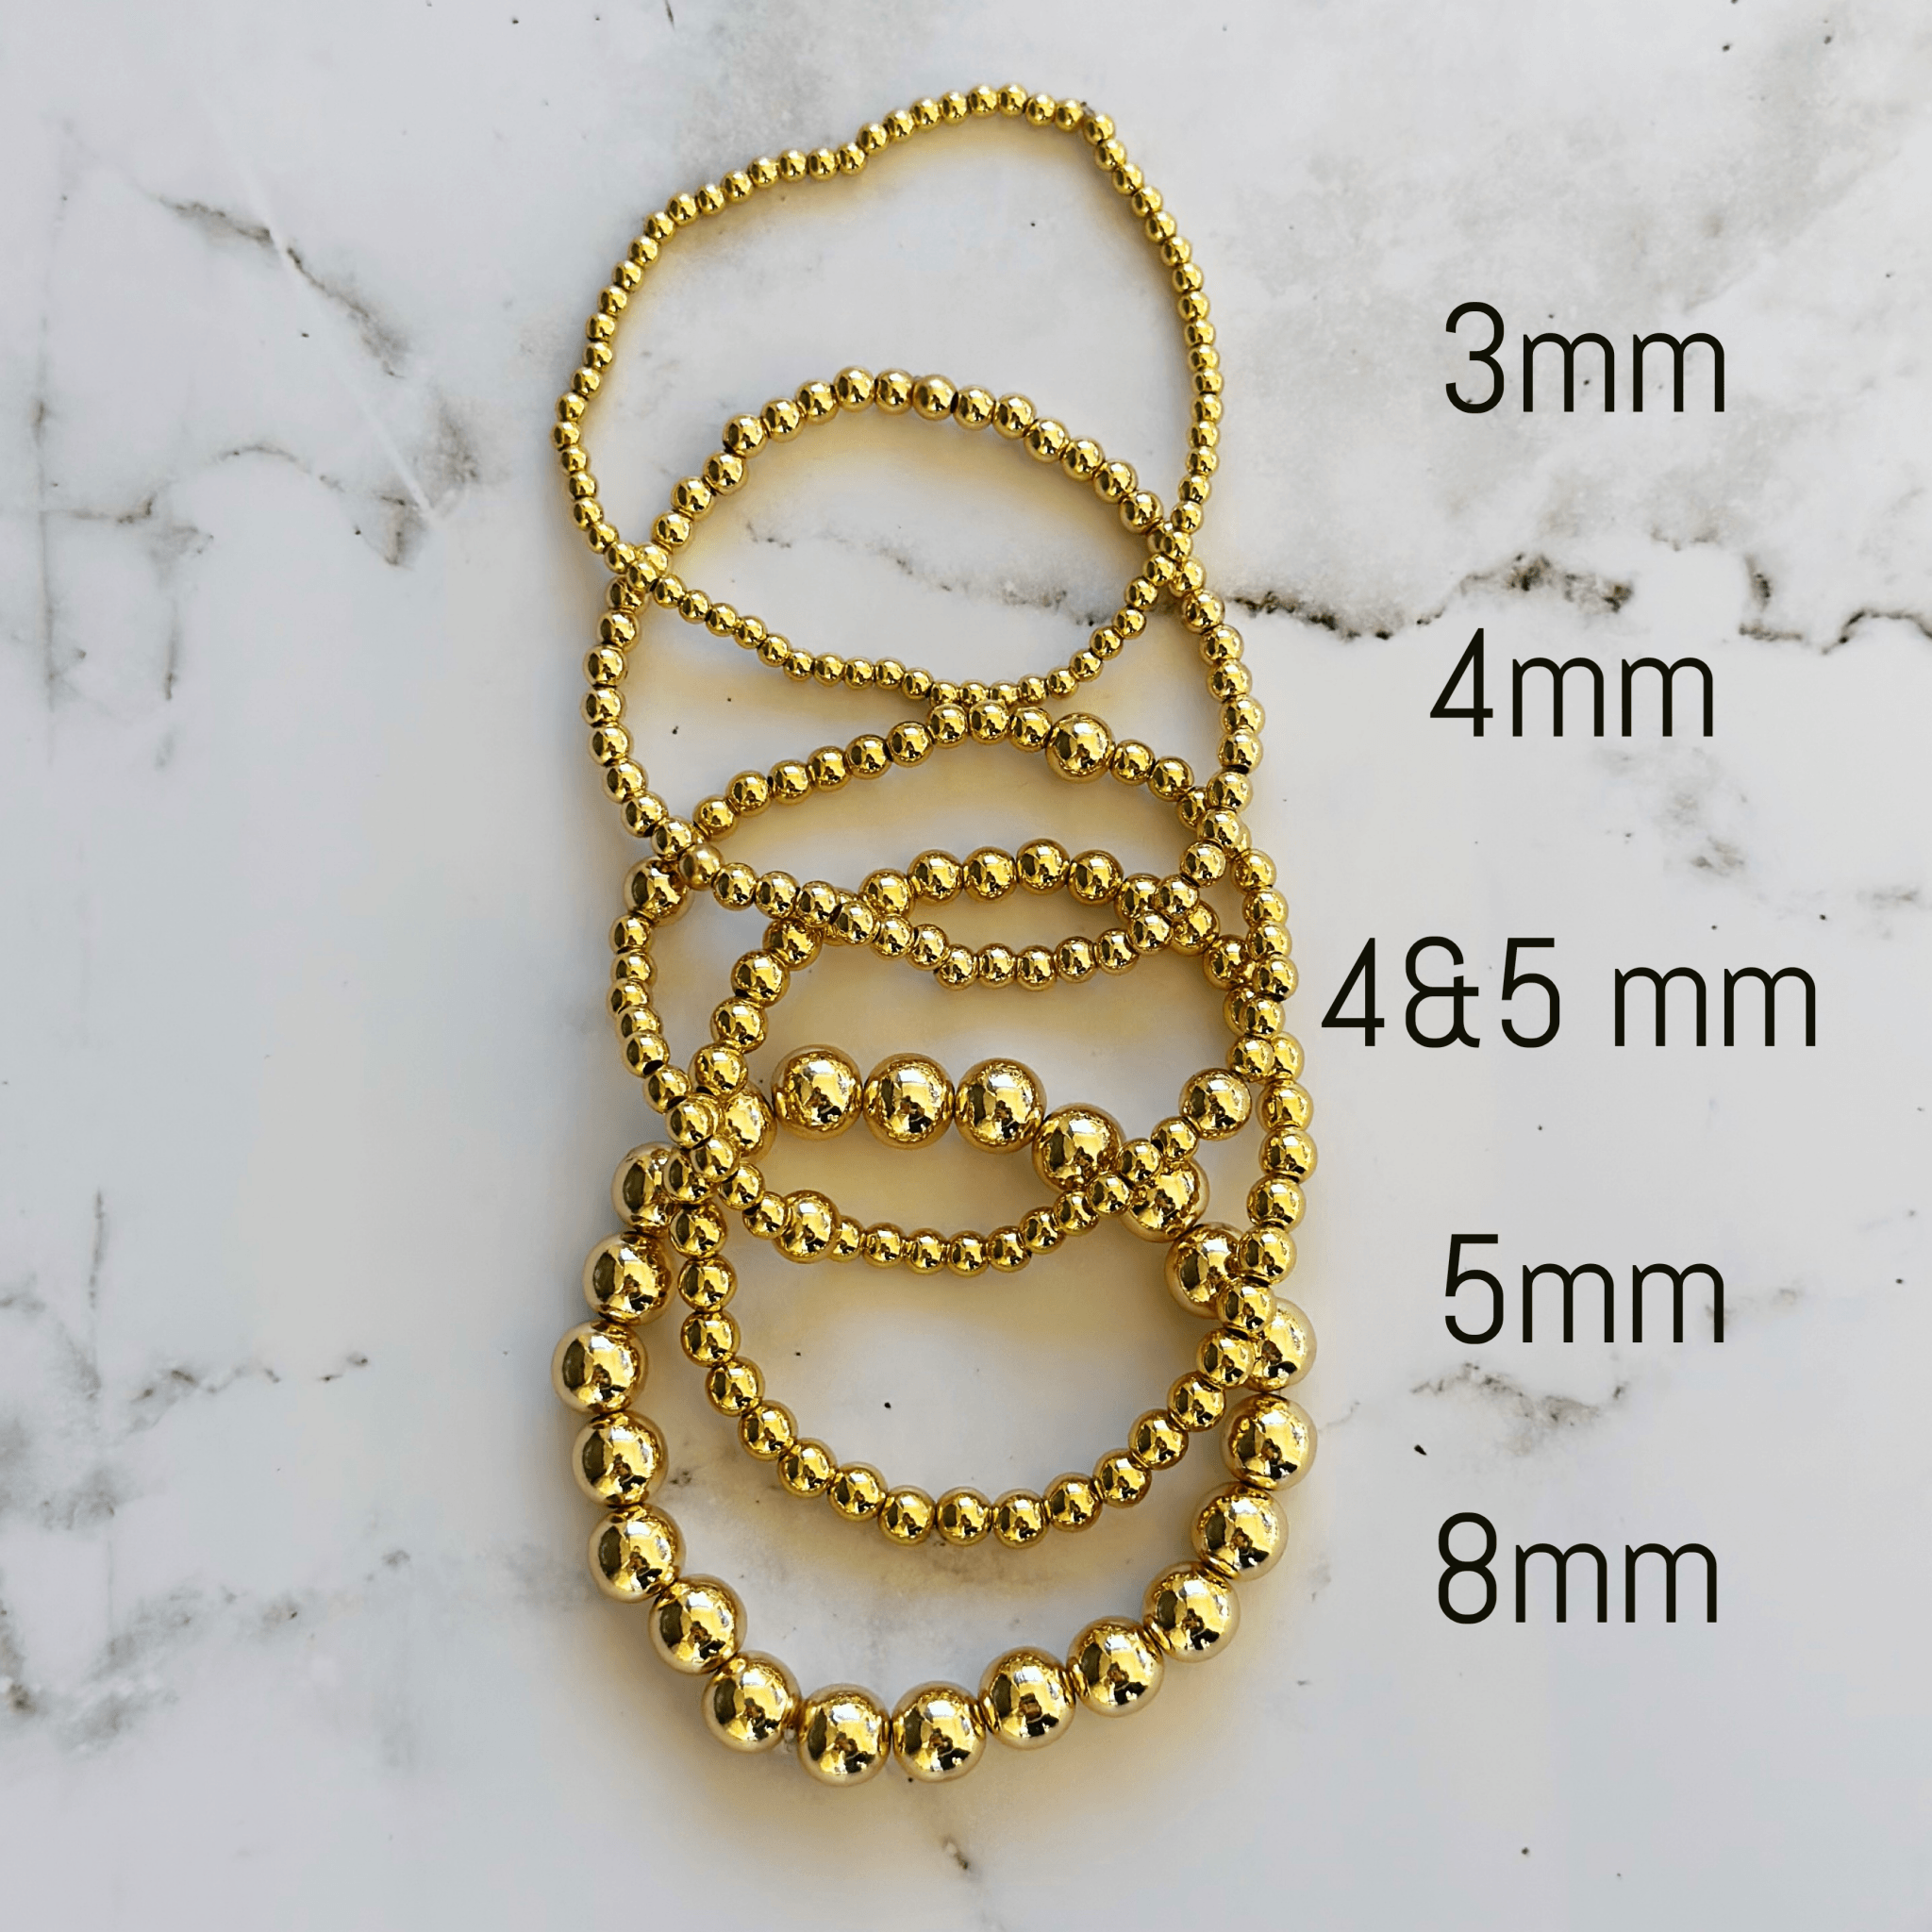 4mm Gold Bead Bracelet - Classy and Timeless | Bliss Bayou AVG Adult - 7.0 Inches